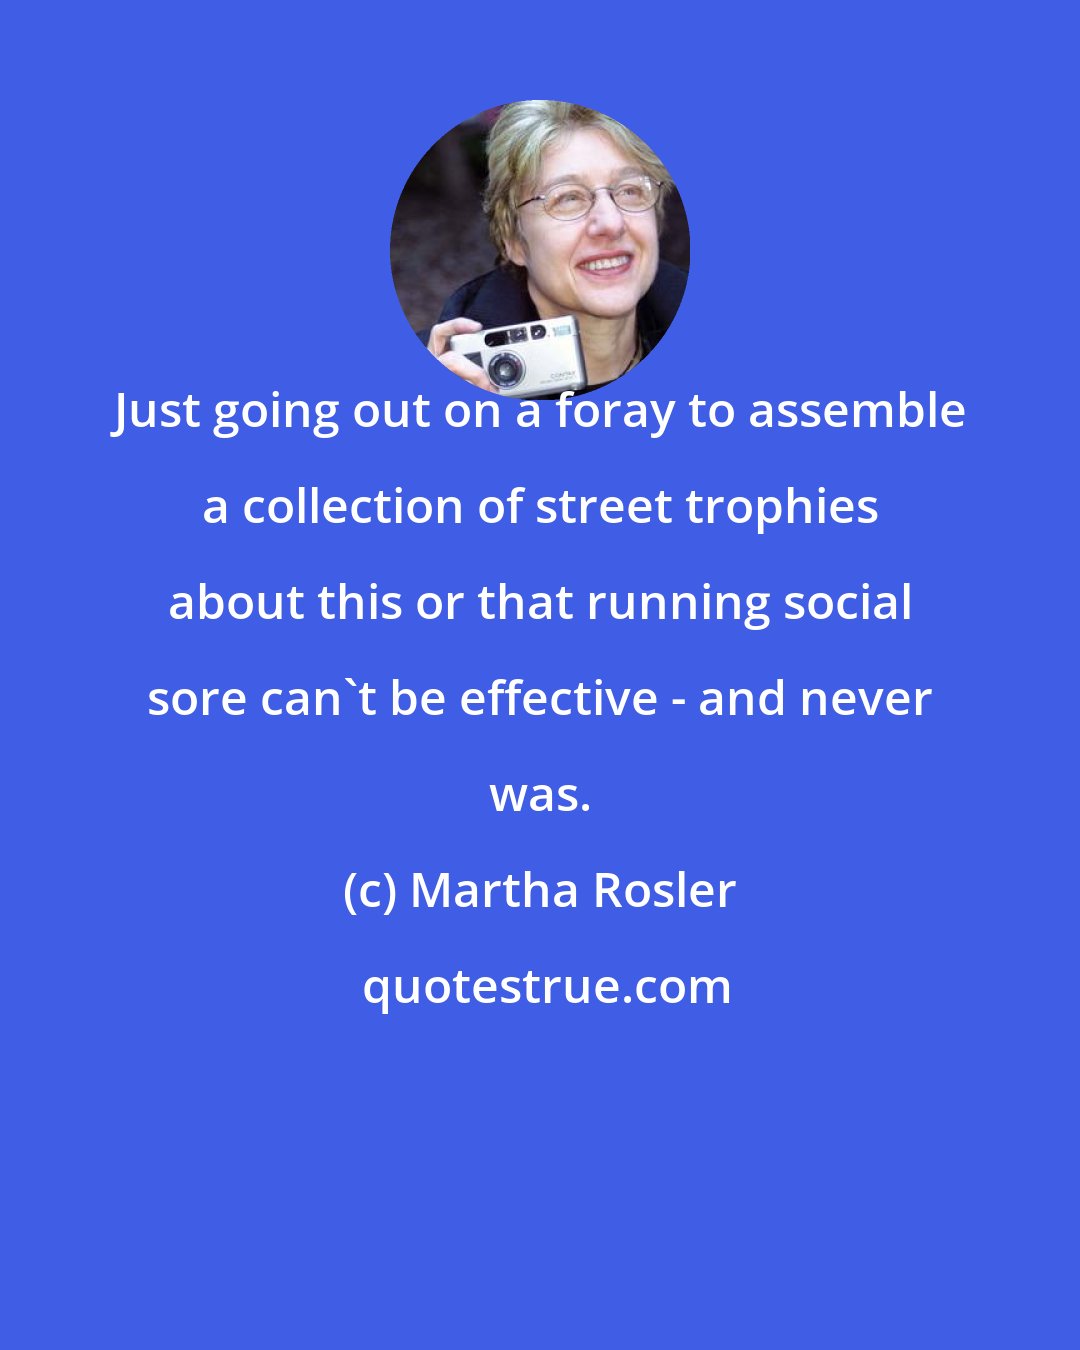 Martha Rosler: Just going out on a foray to assemble a collection of street trophies about this or that running social sore can't be effective - and never was.